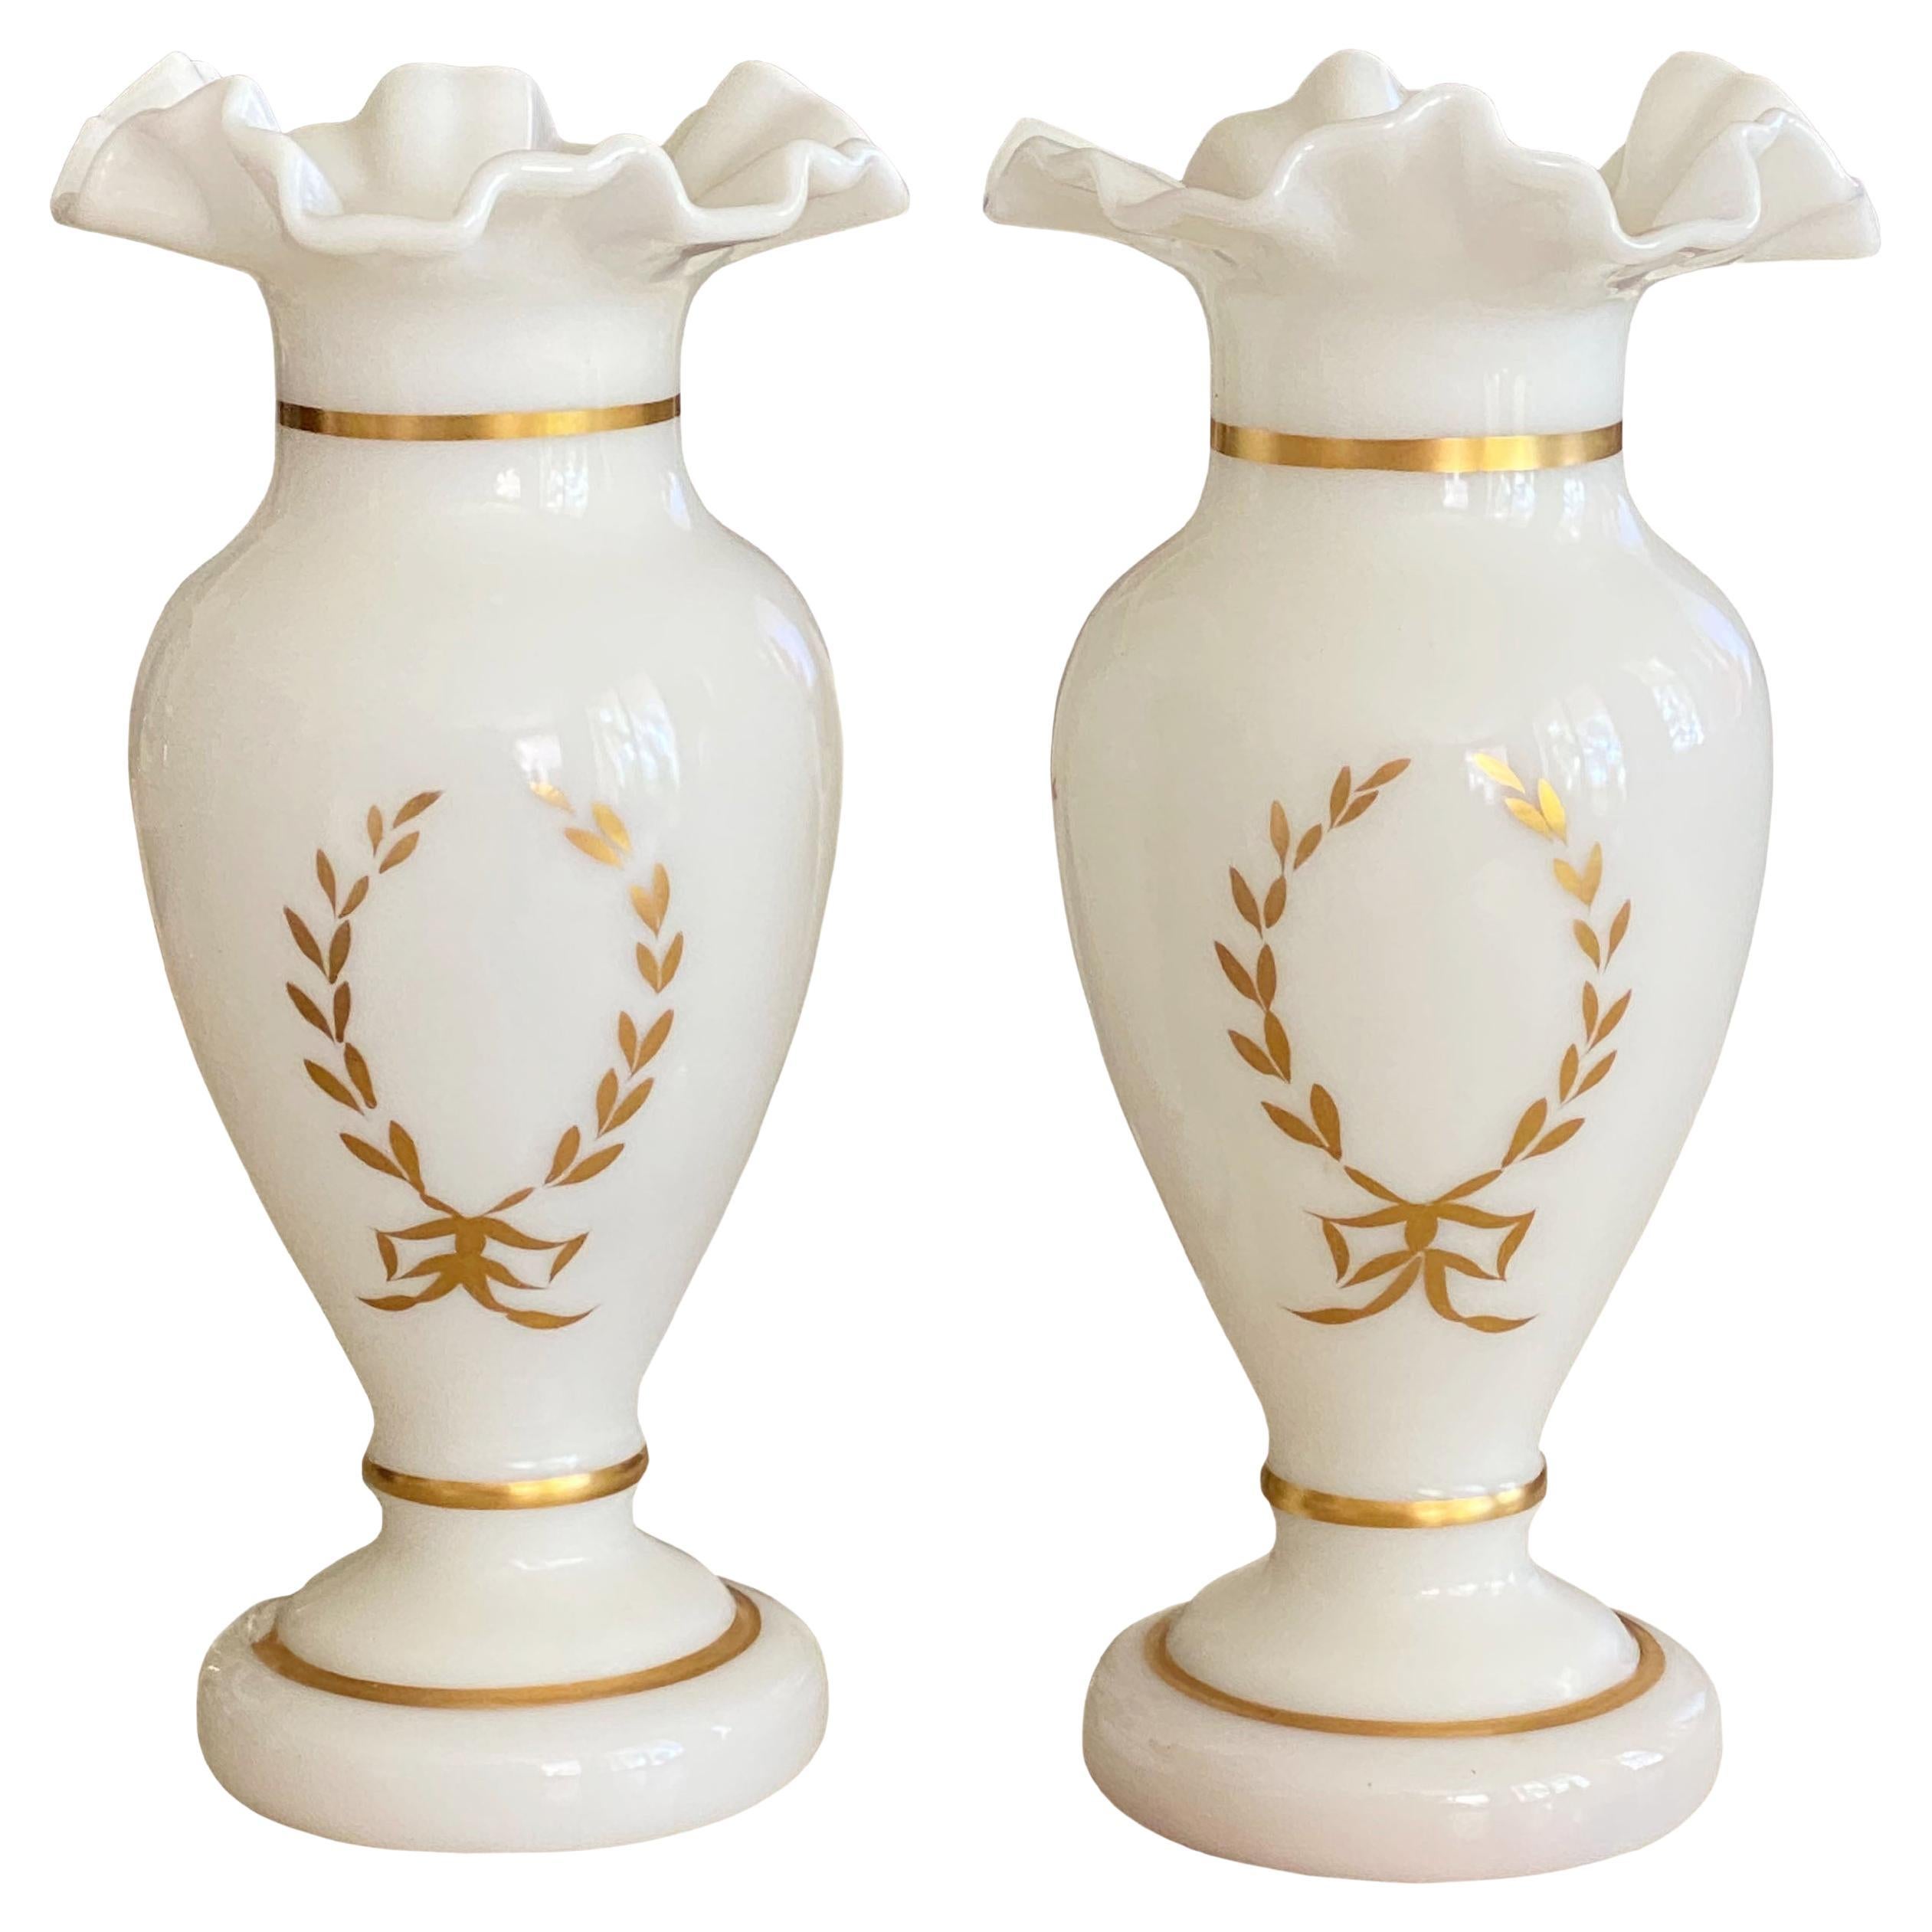 Antique White and Gilt Opaline Vases, a Pair For Sale at 1stDibs